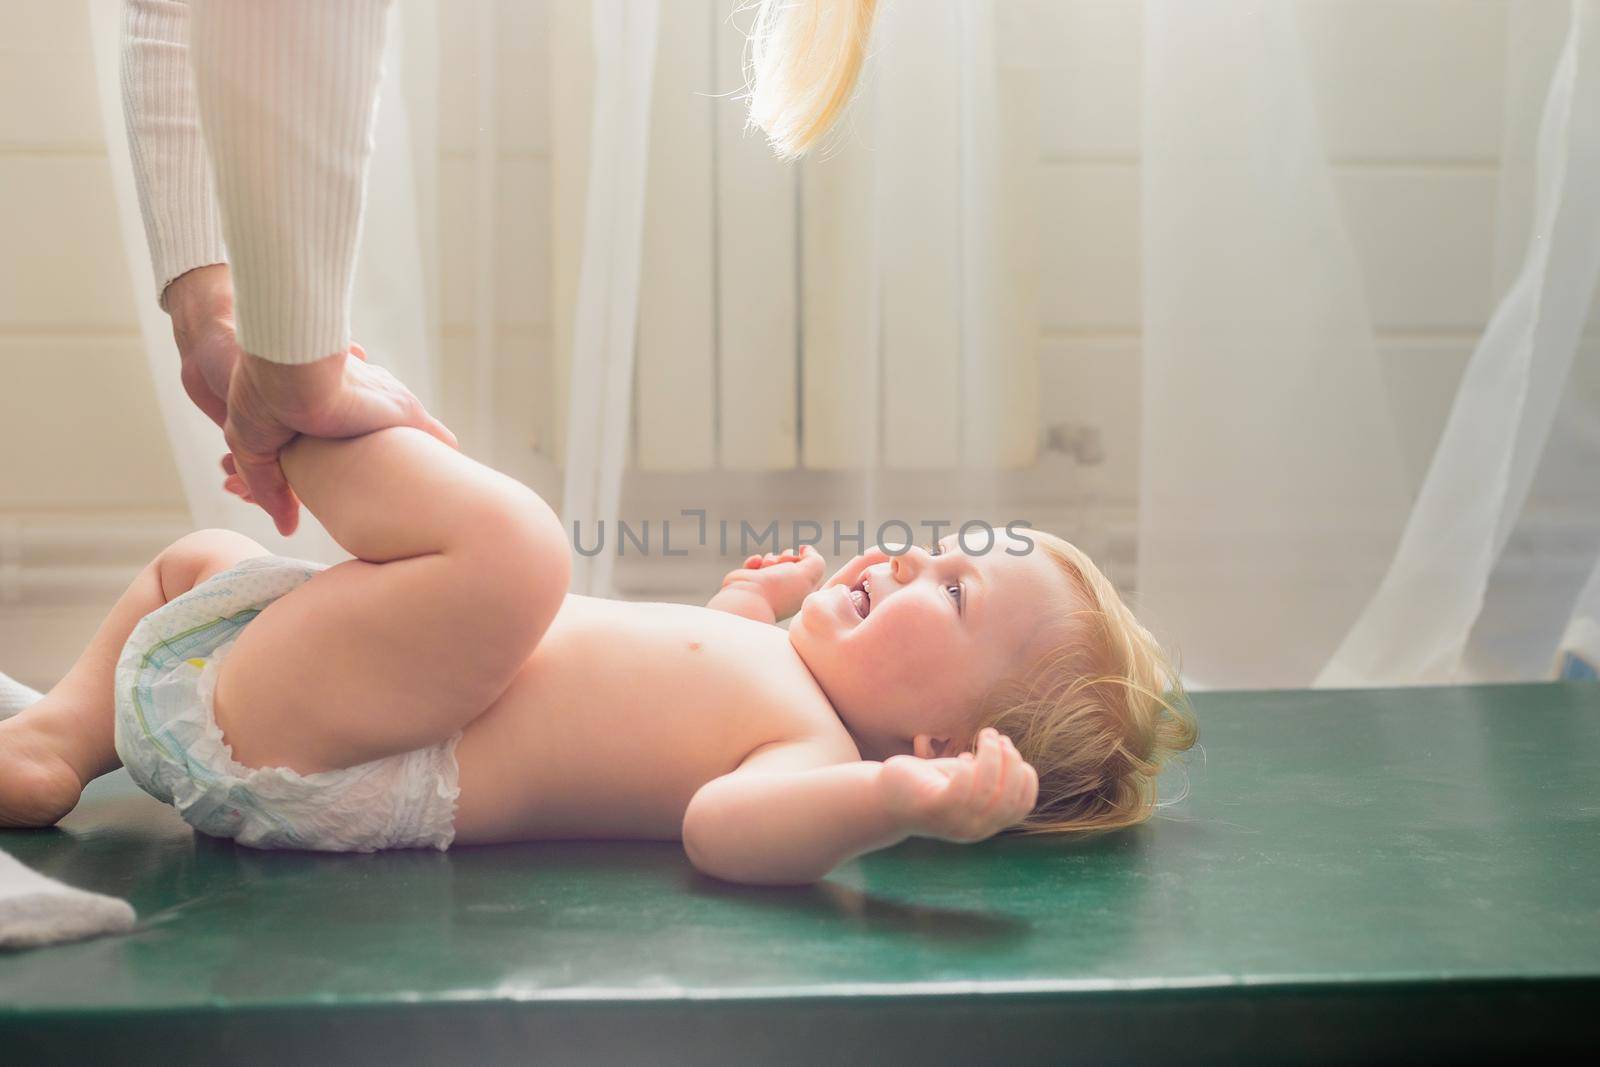 Mom does baby gymnastics for the baby's legs. Close-up. by Yurich32